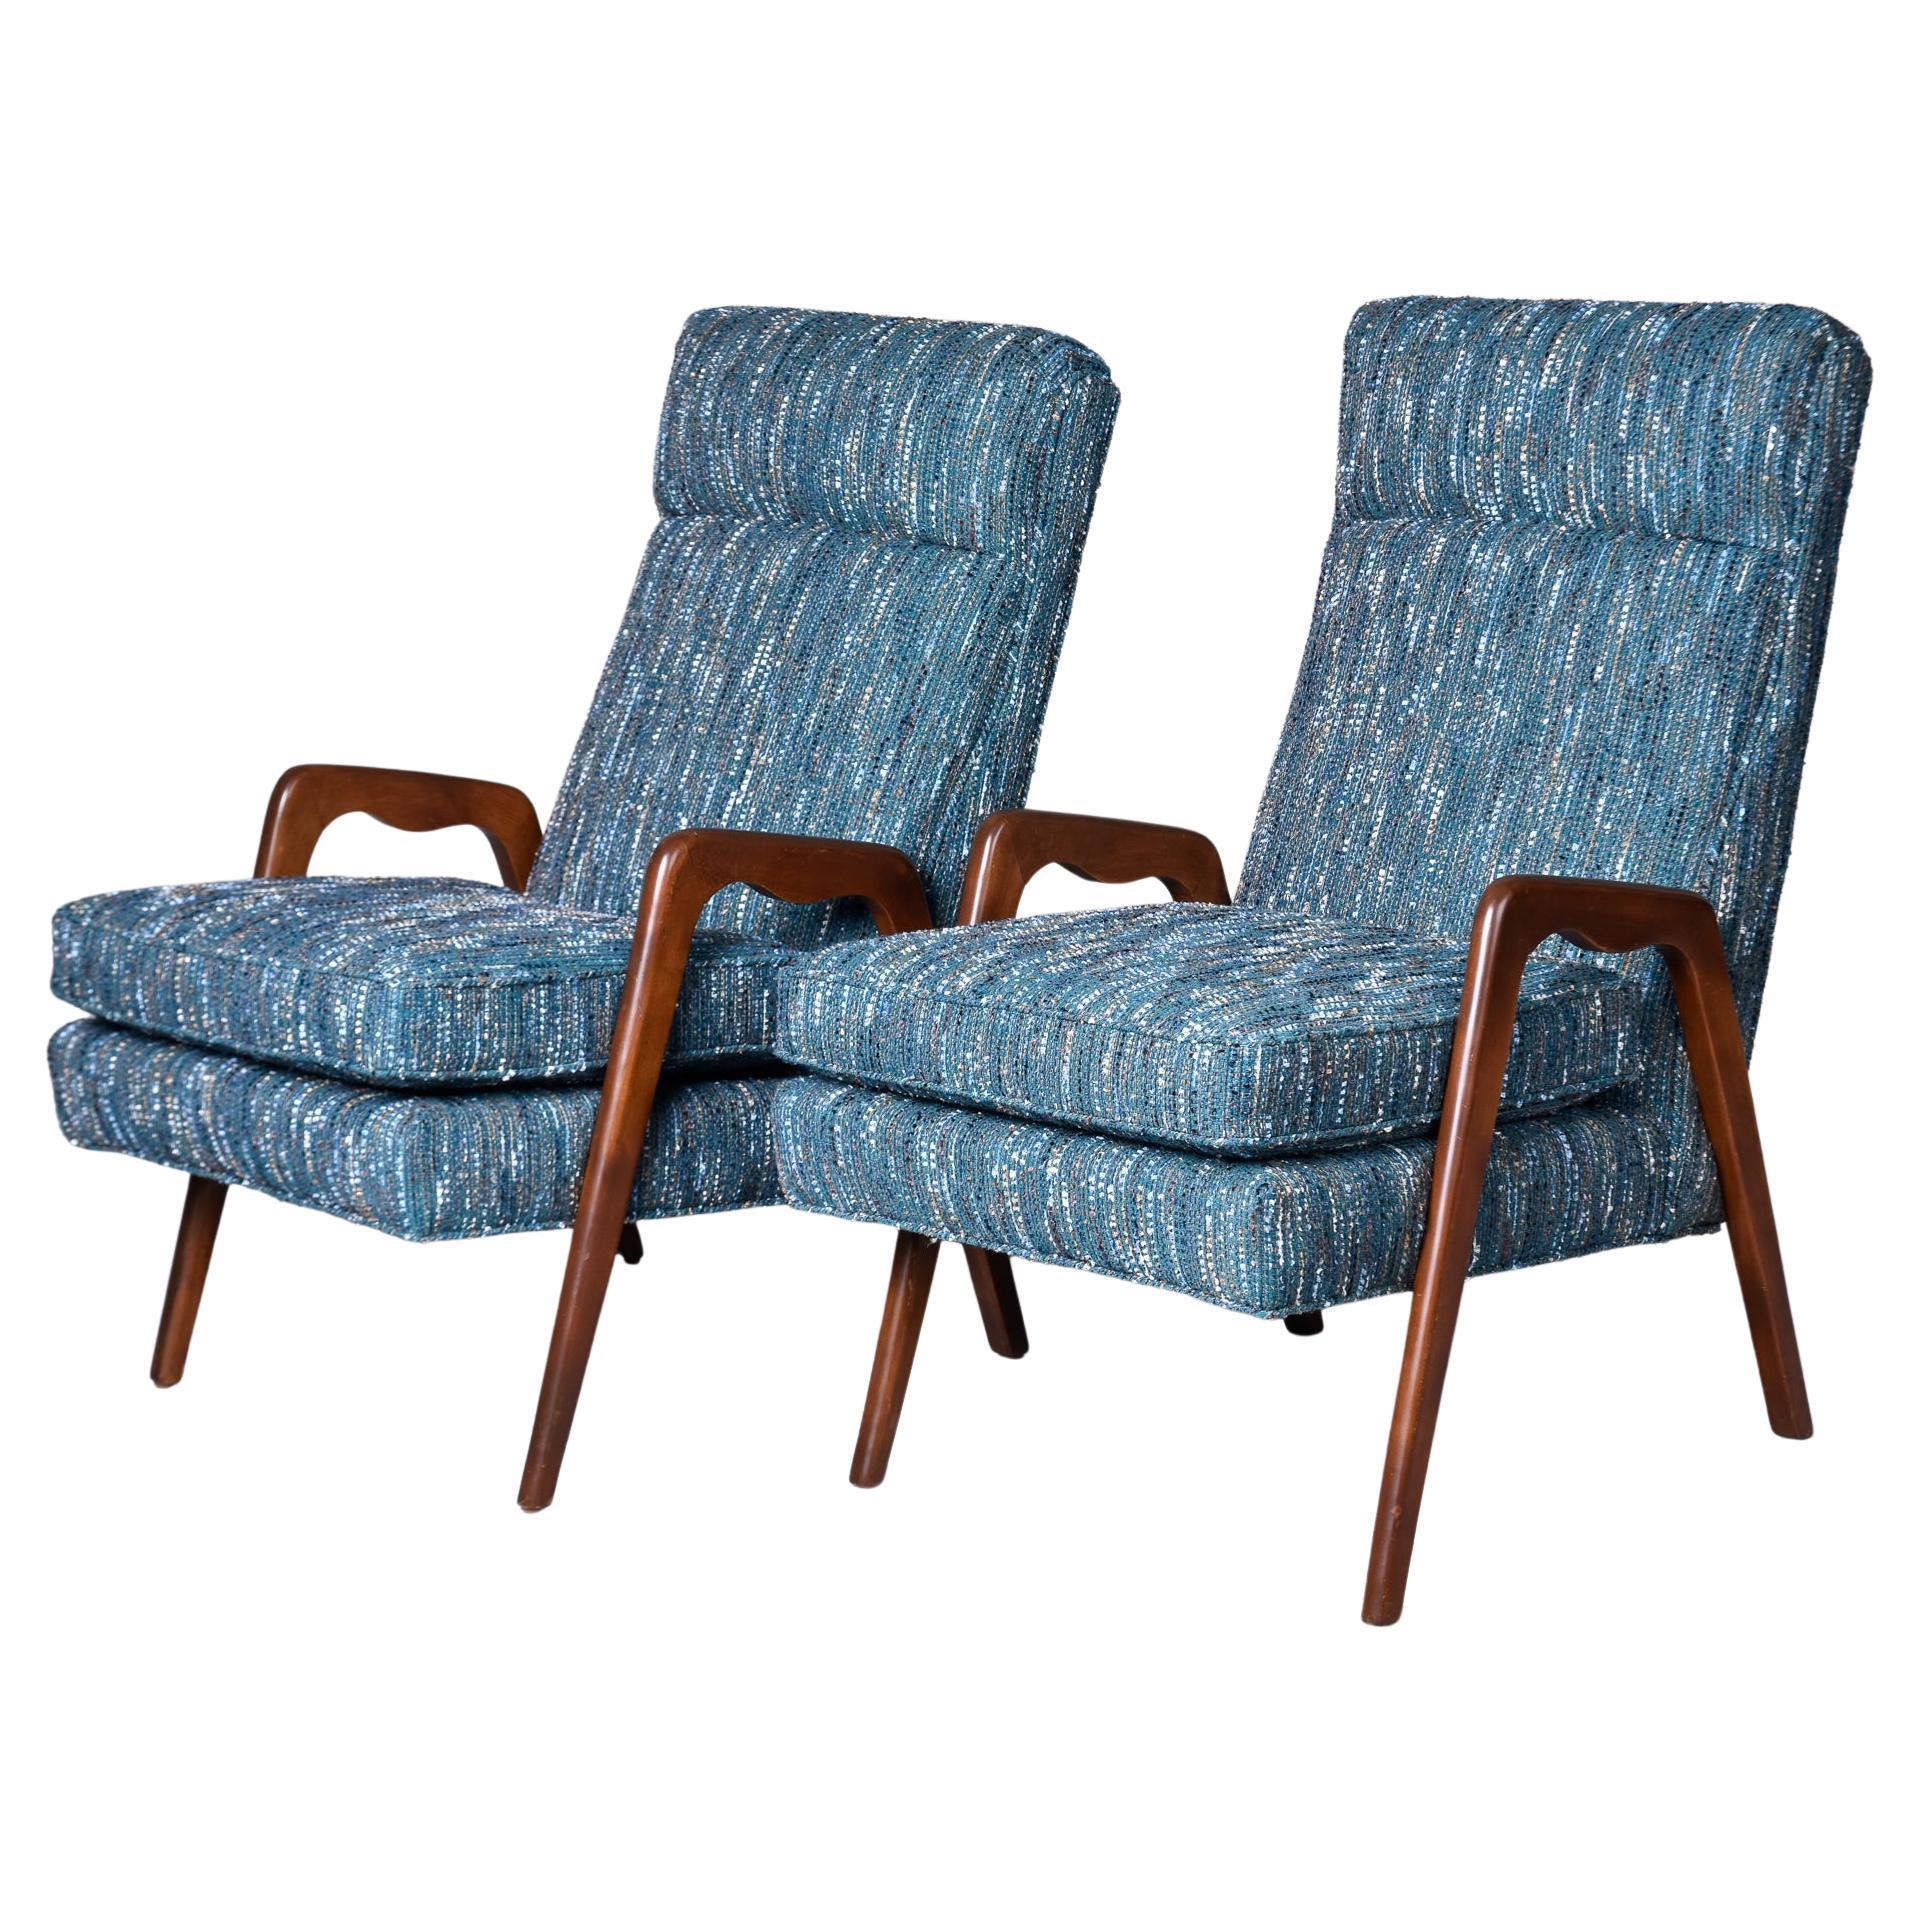 Pair of Mid-Century Italian Chairs with New Teal Tweed Upholstery